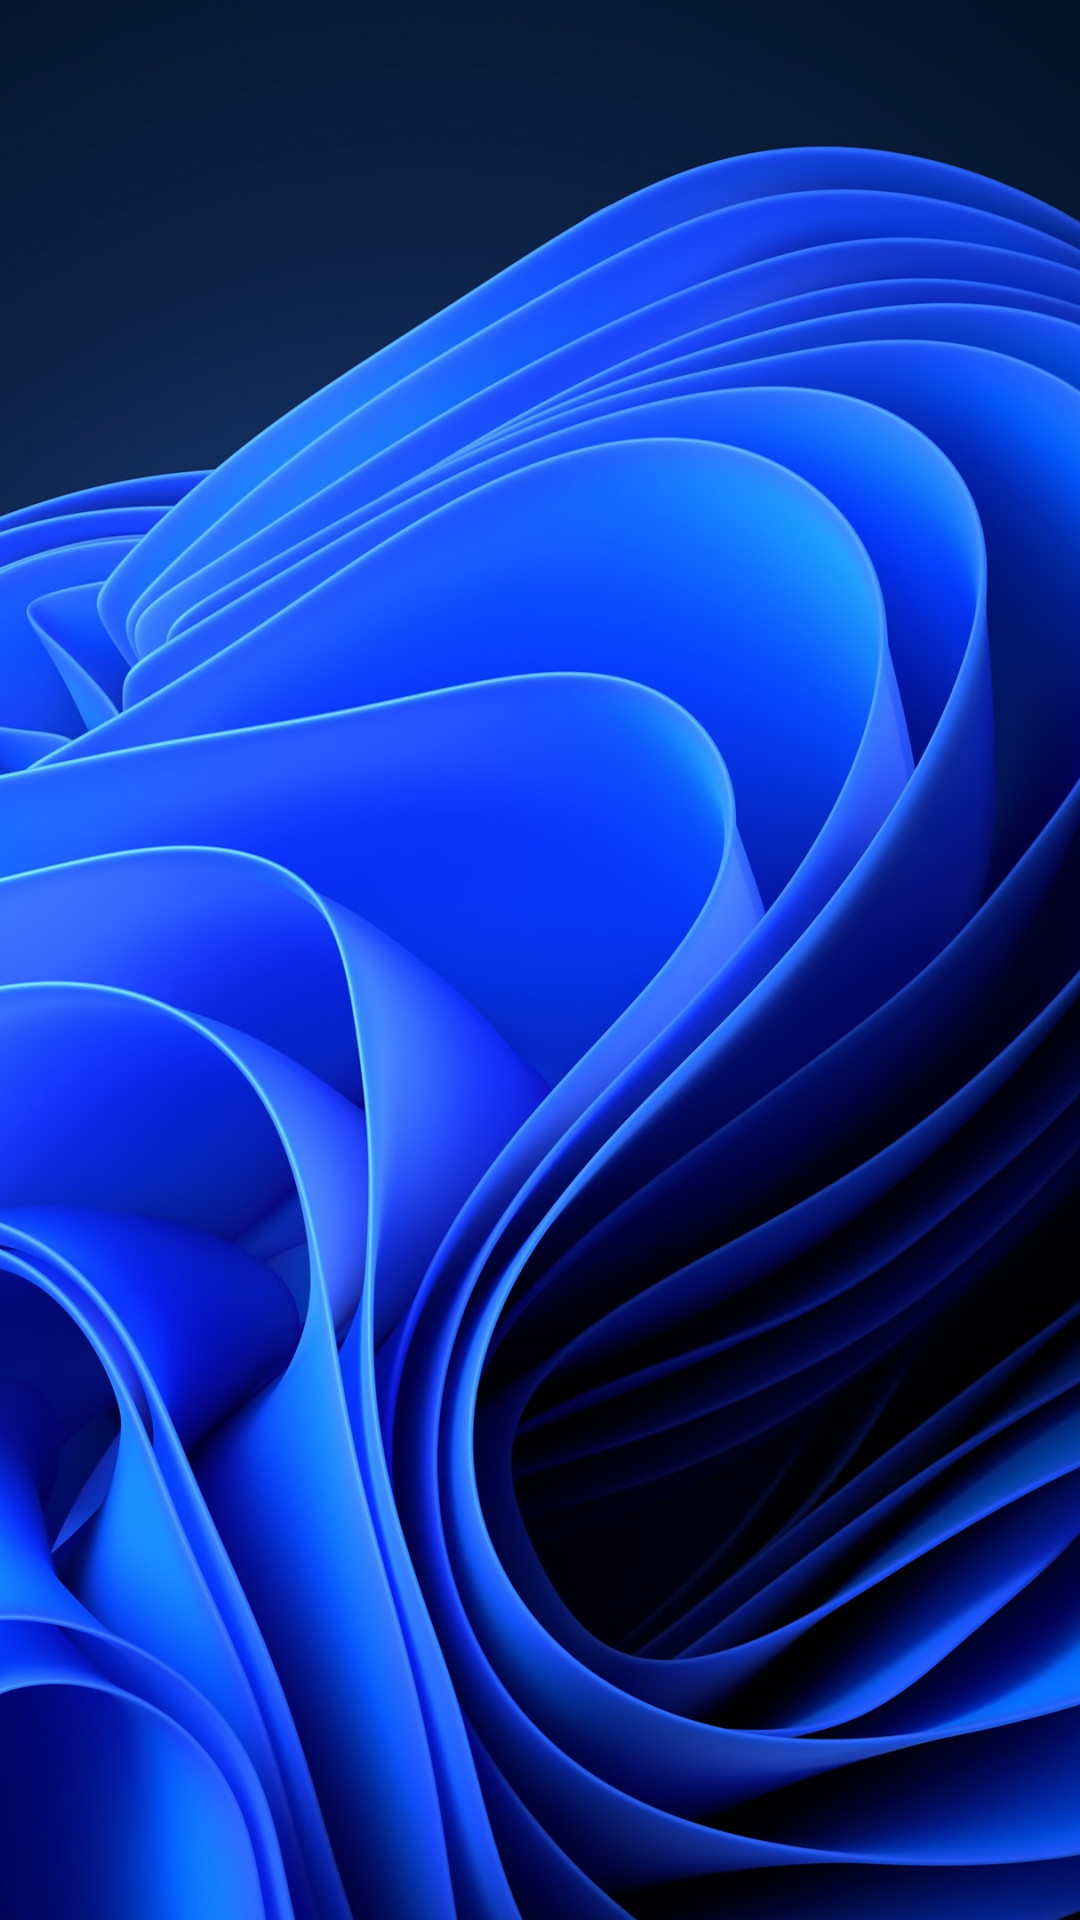 Download wallpaper: Windows 11 blue abstract 1080x1920